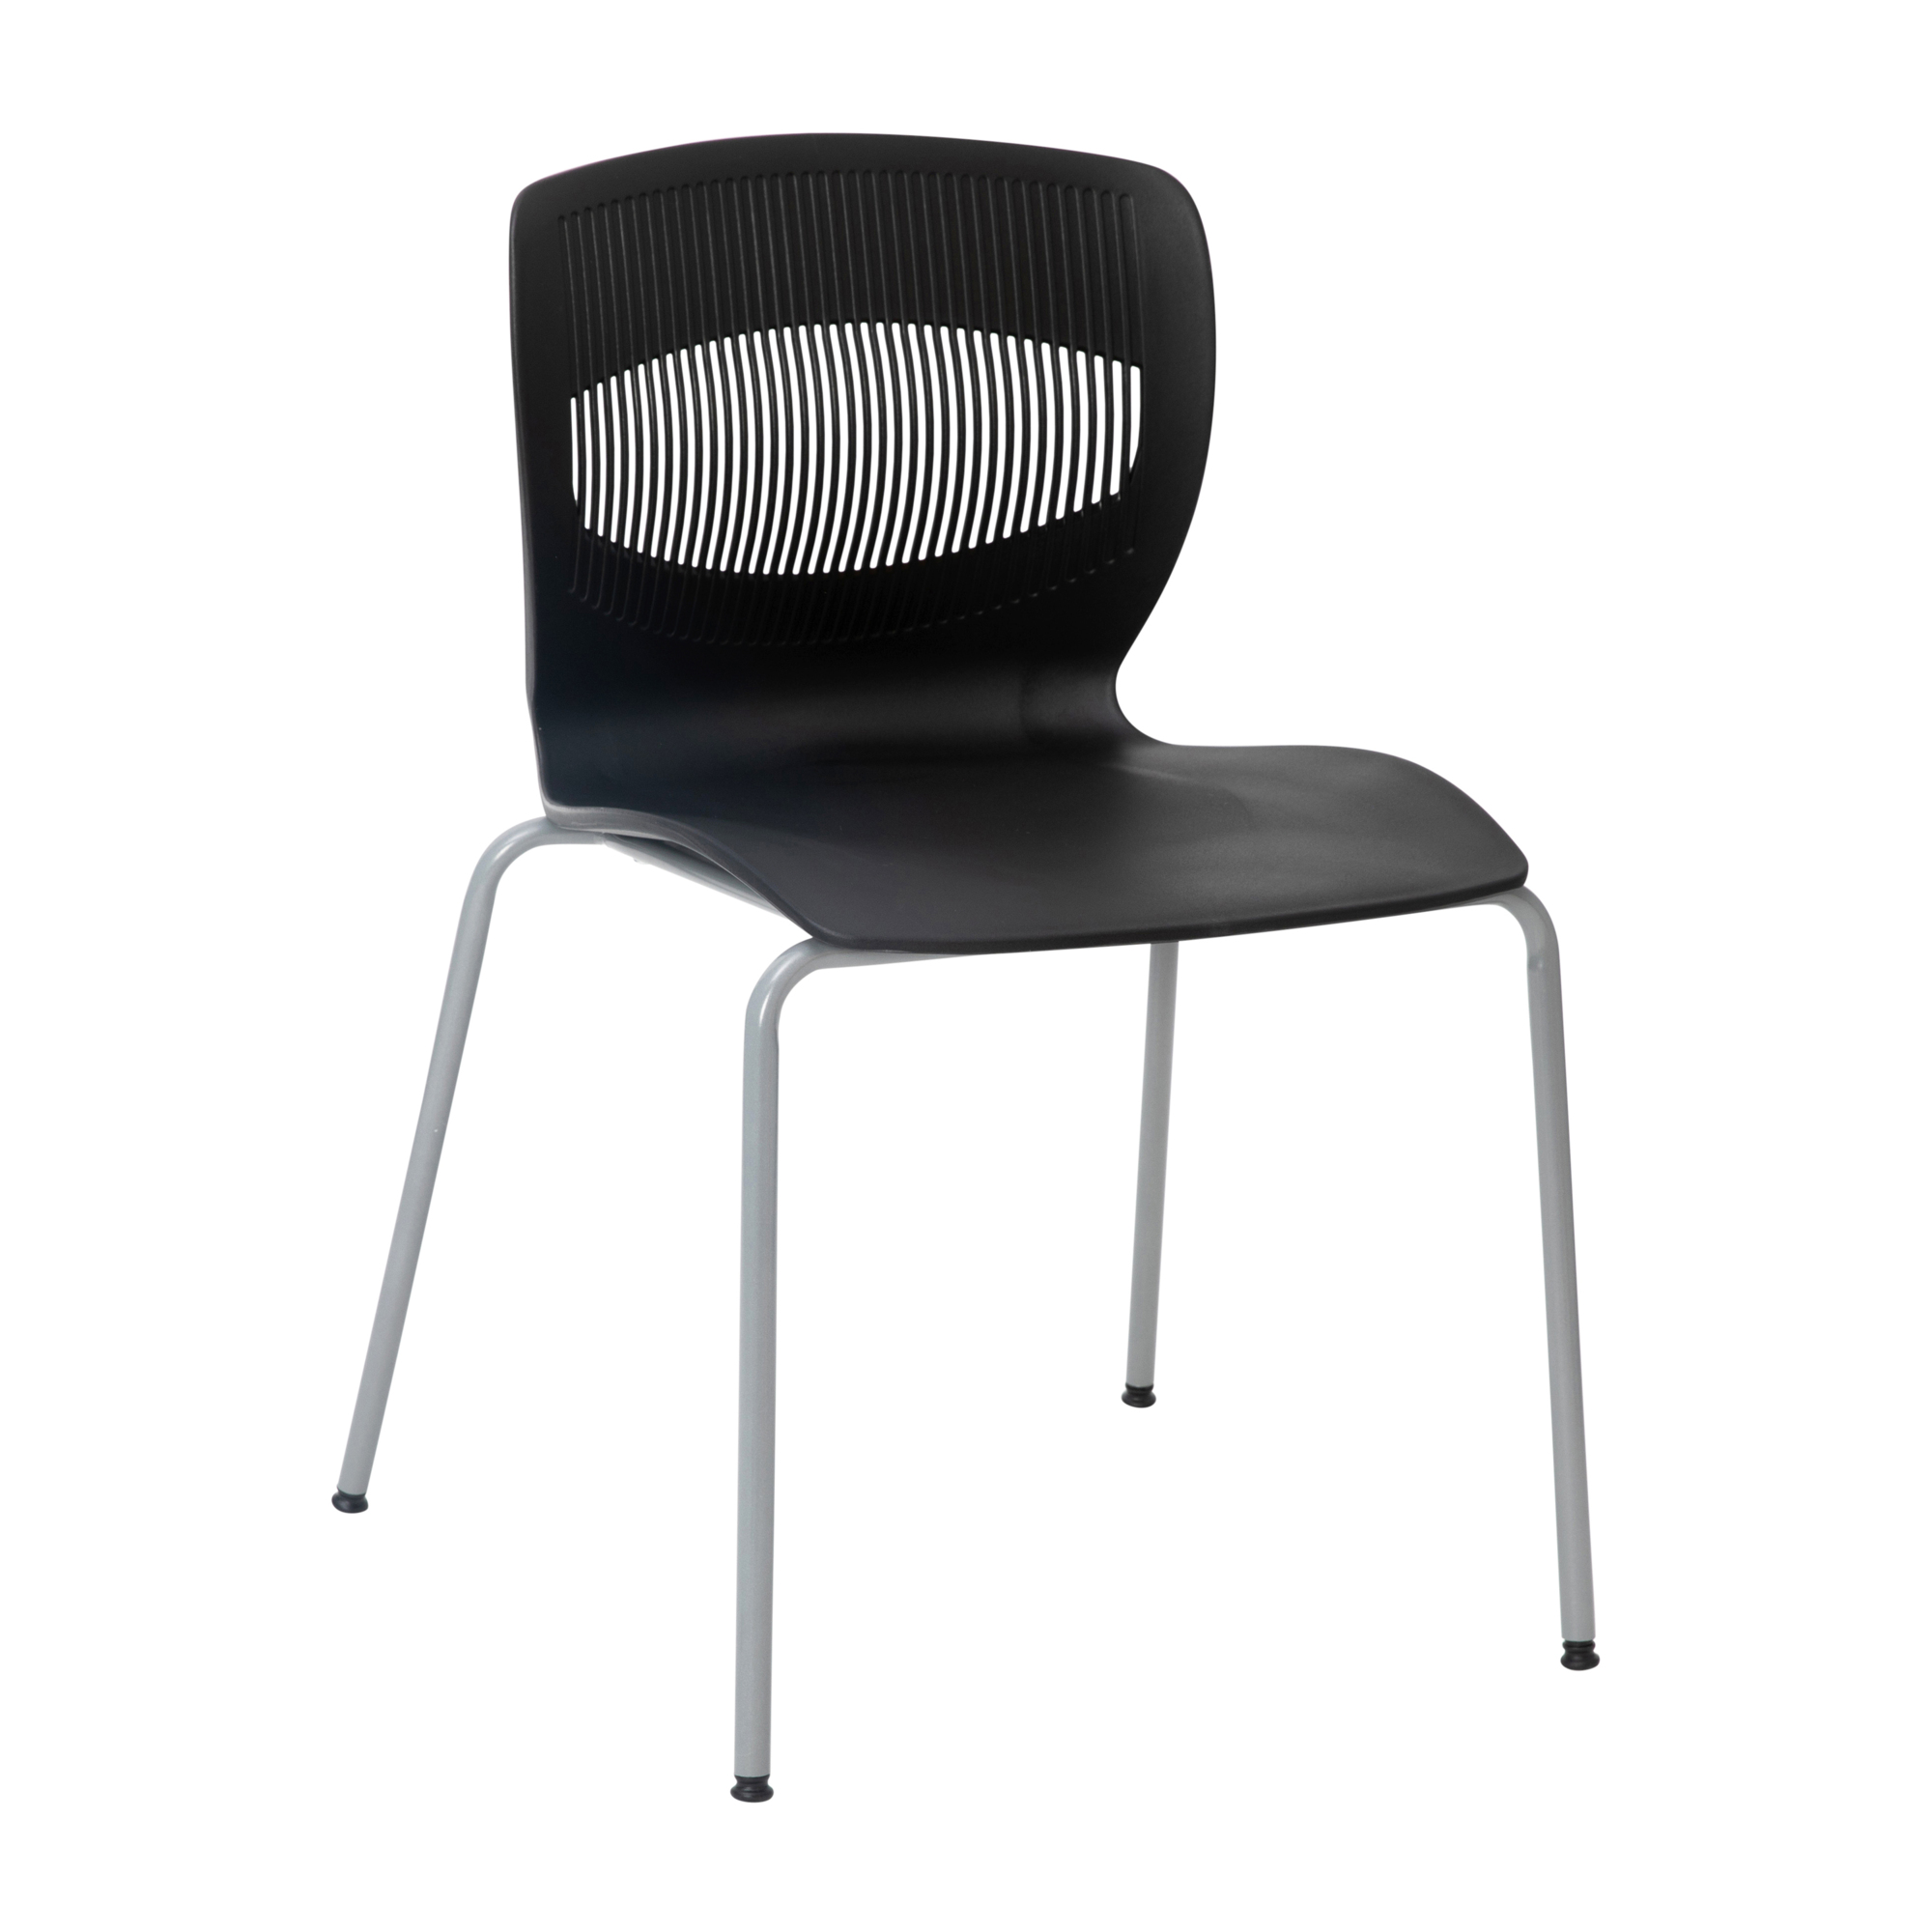 Flash Furniture, Black Plastic Stack Chair with Lumbar Support, Primary Color Black, Included (qty.) 1, Model RUTNC618BK